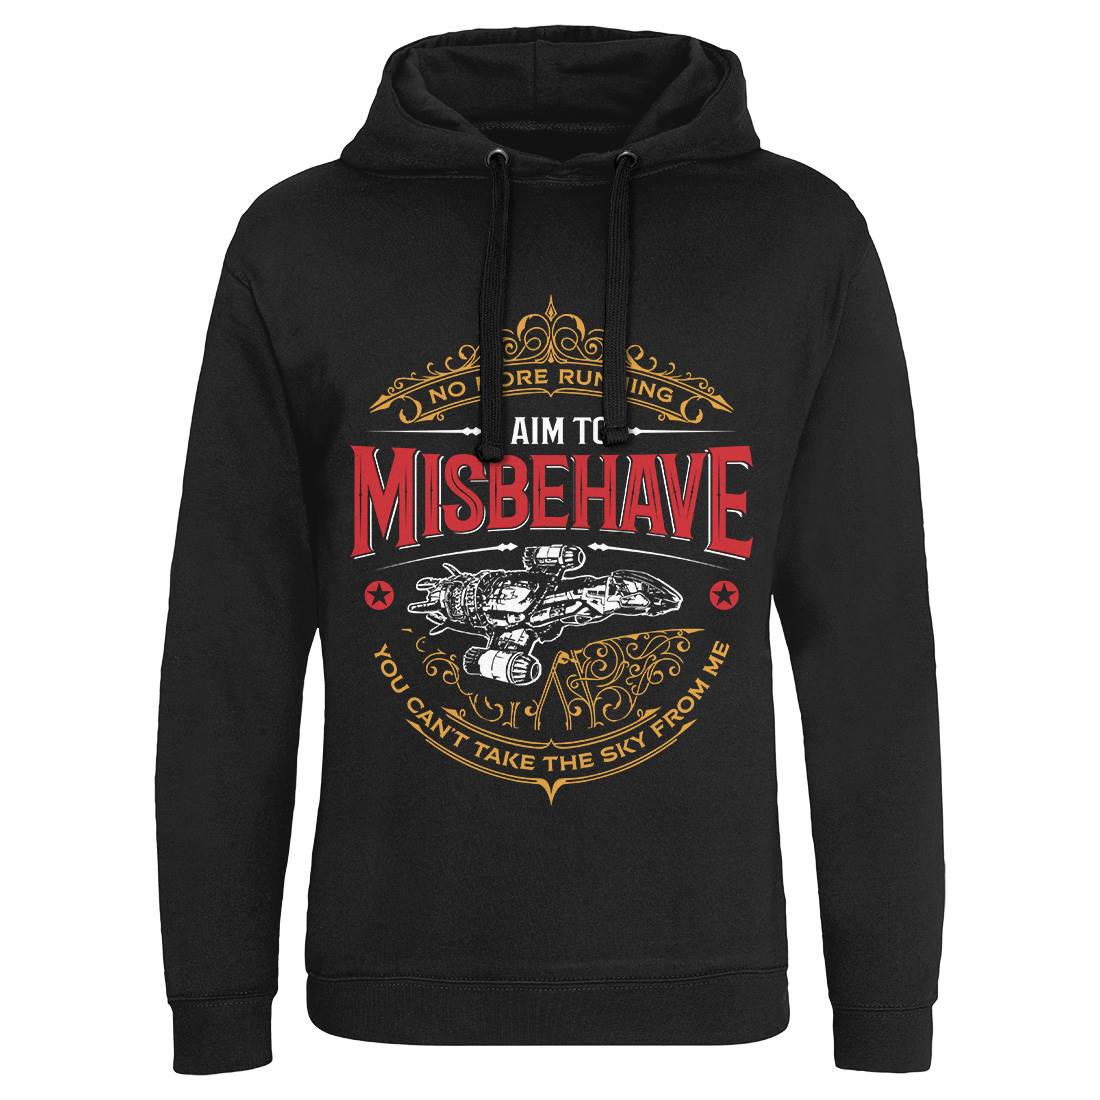 I Aim To Misbehave Mens Hoodie Without Pocket Space D435